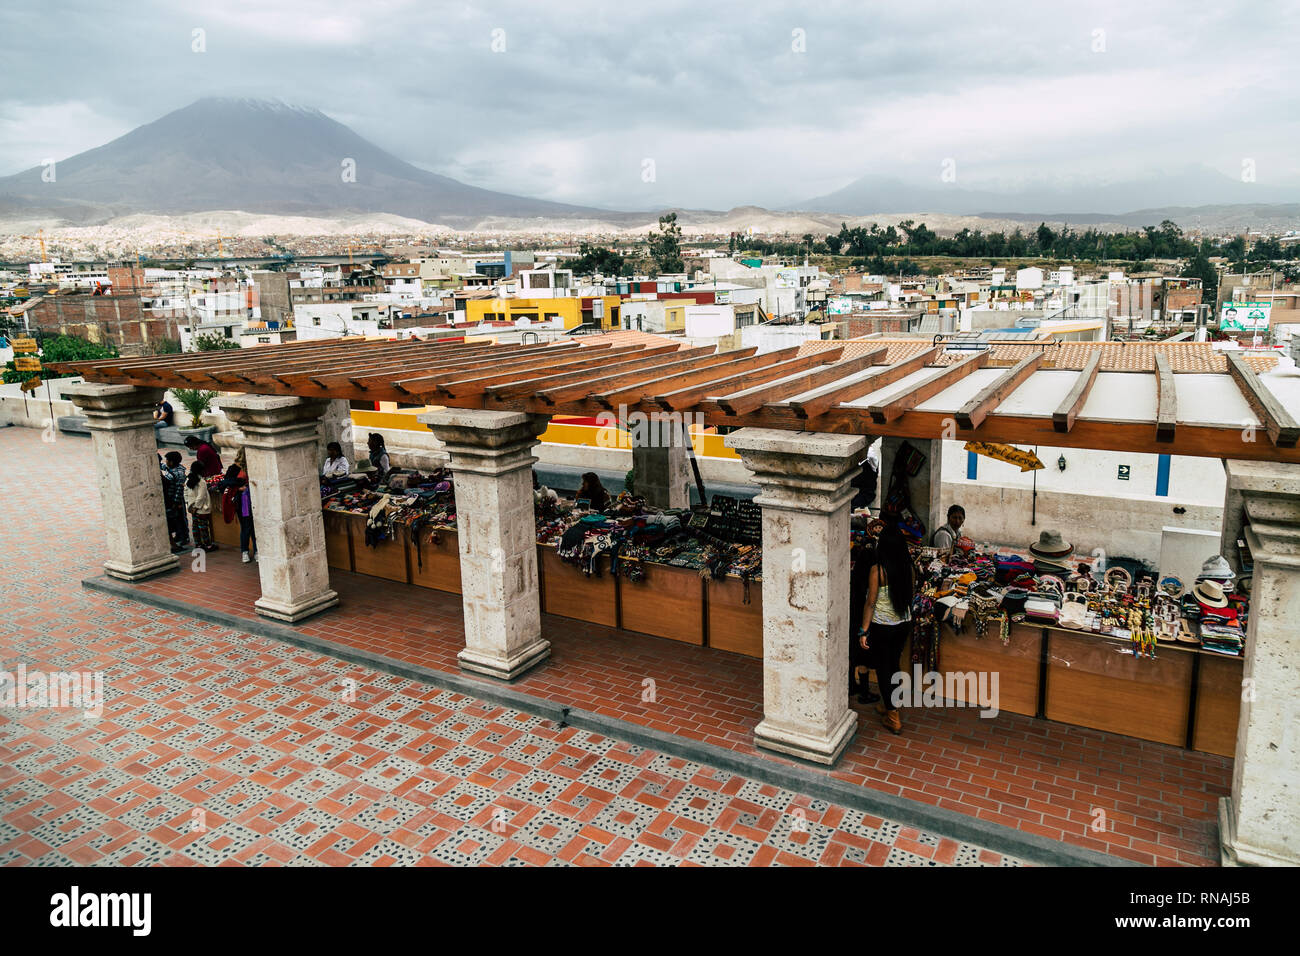 Vendors of artisanal products on a square in the White City (Arequipa, Peru) with the city and volcano Misti in the background. Stock Photo